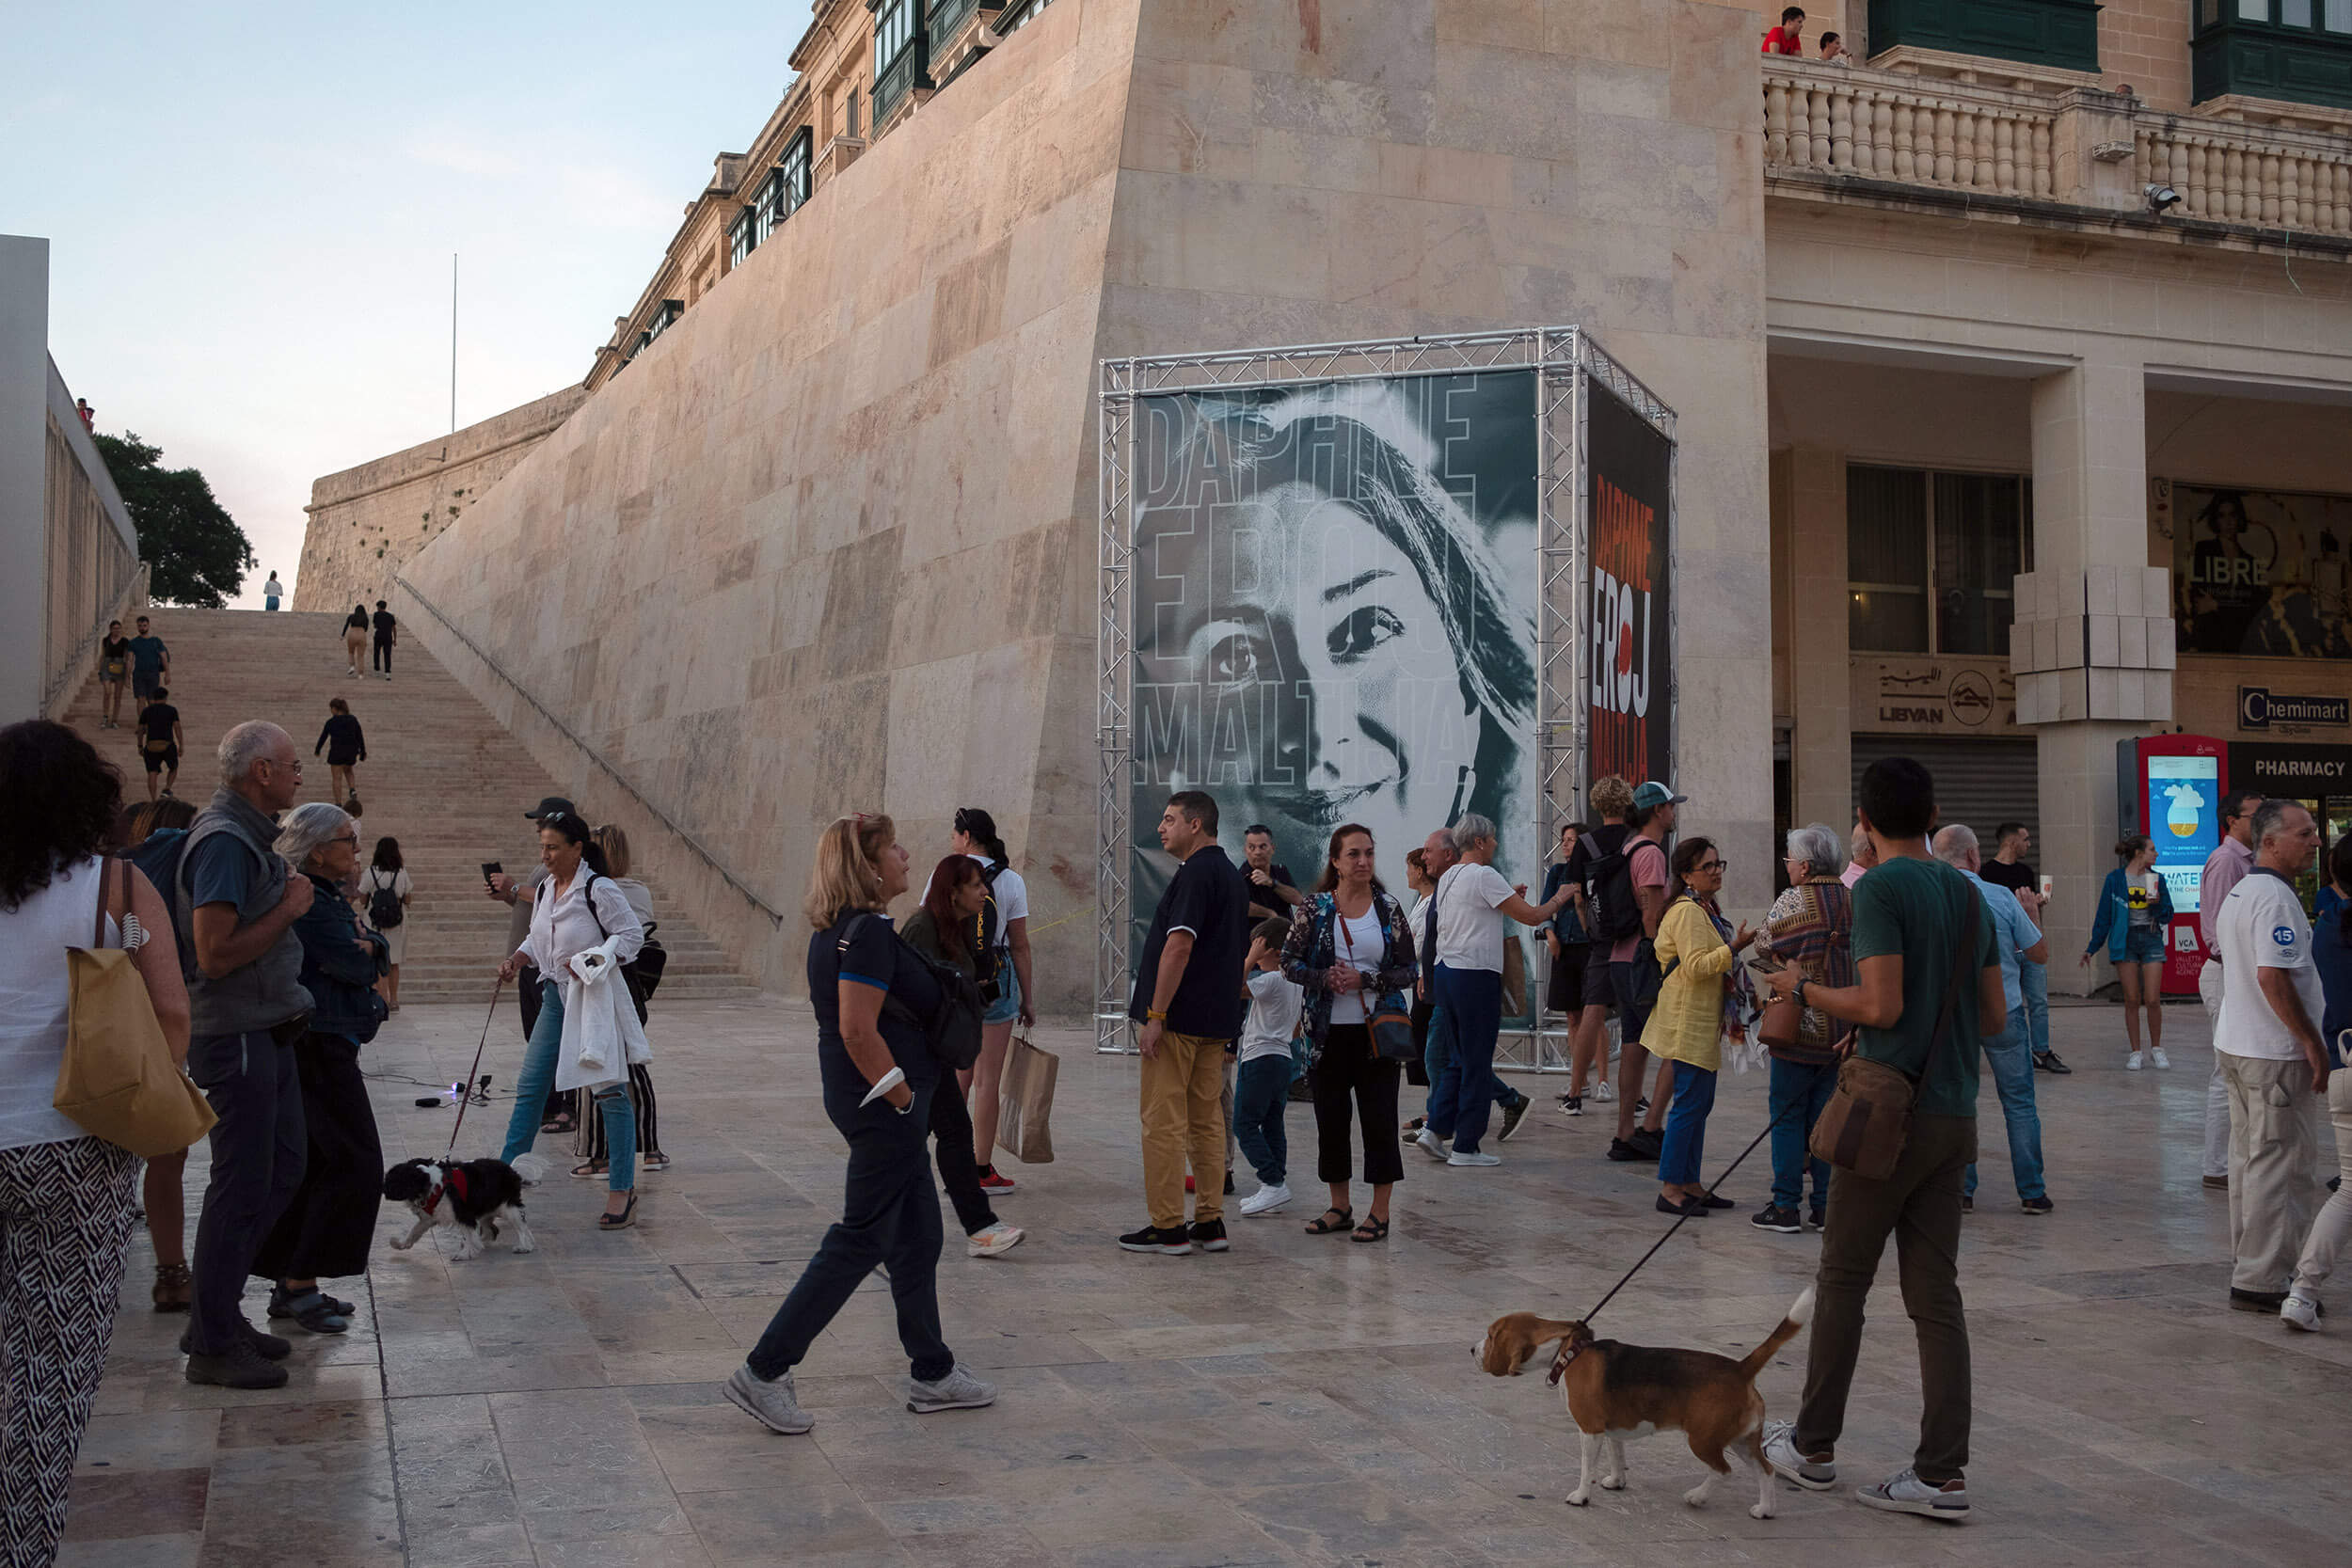 Malta: Civil society denounces government's lack of ambition and transparency in press freedom reforms and renews calls for full justice for Daphne Caruana Galizia